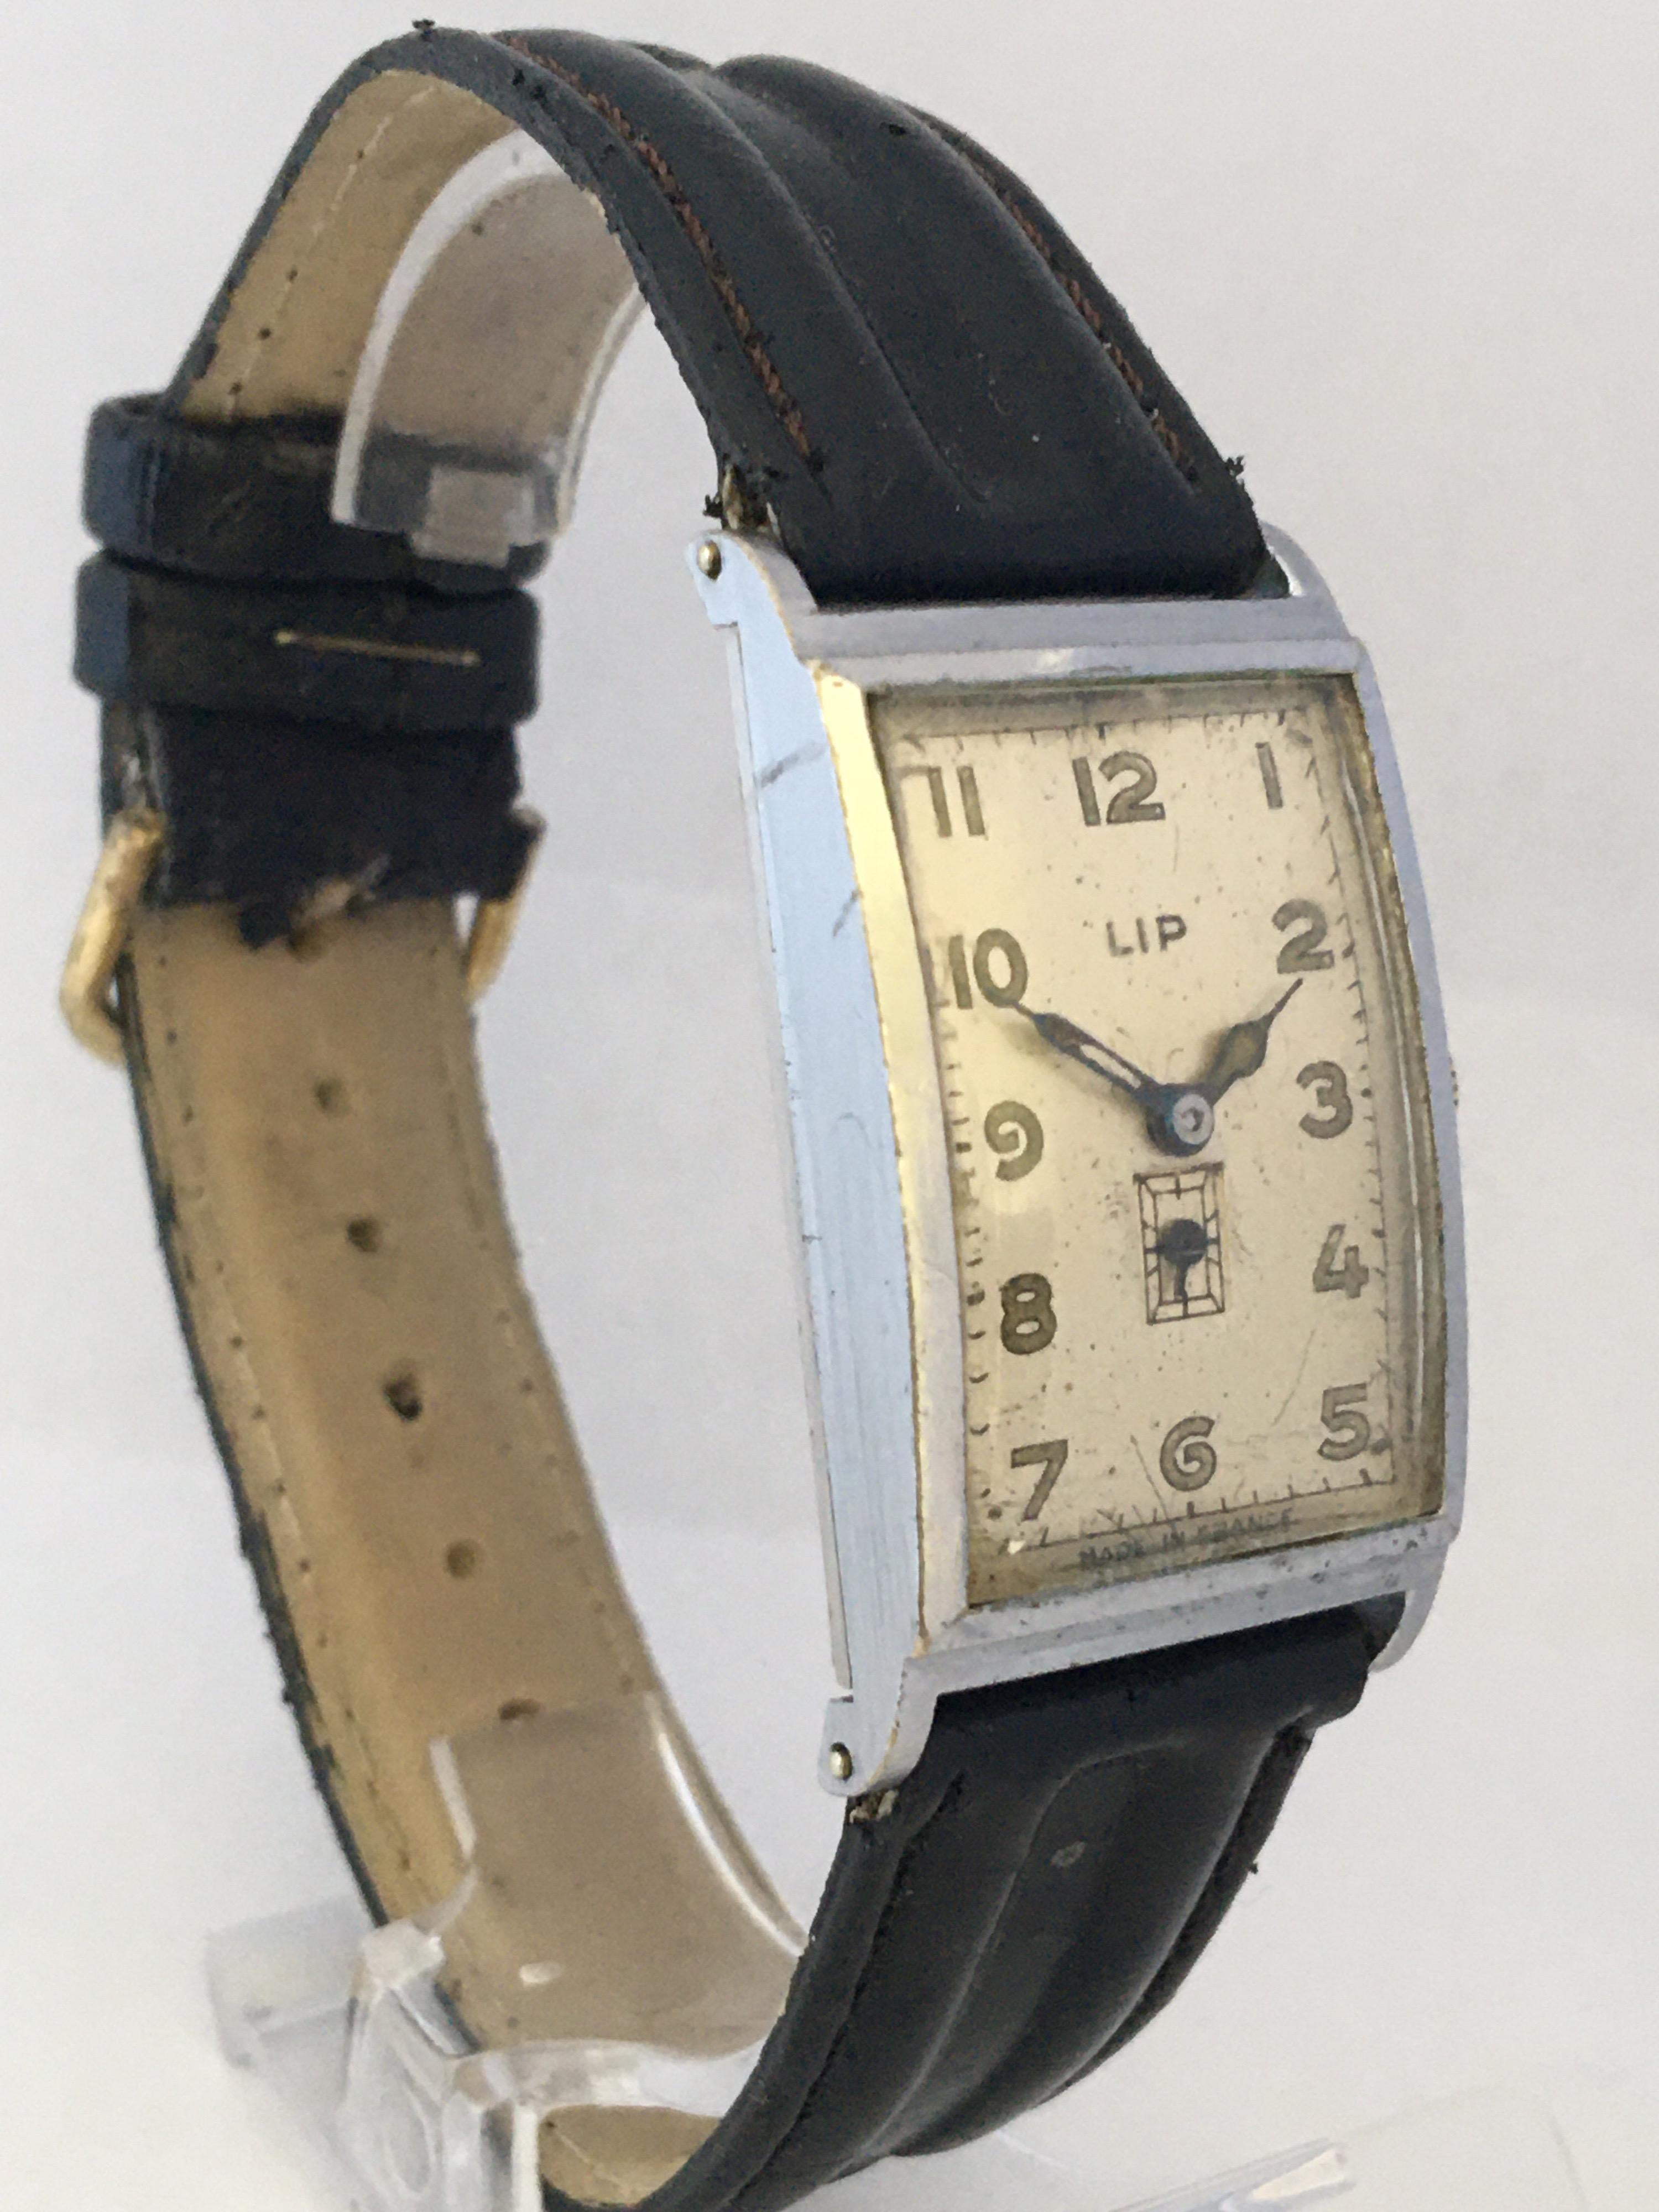 This beautiful pre-owned vintage watch is working and it is ticking well. Visible signs of ageing and wear with with scratches on the glass and watch case. Some tarnishes on the silver plated watch case and the winder. The watch strap is worn and